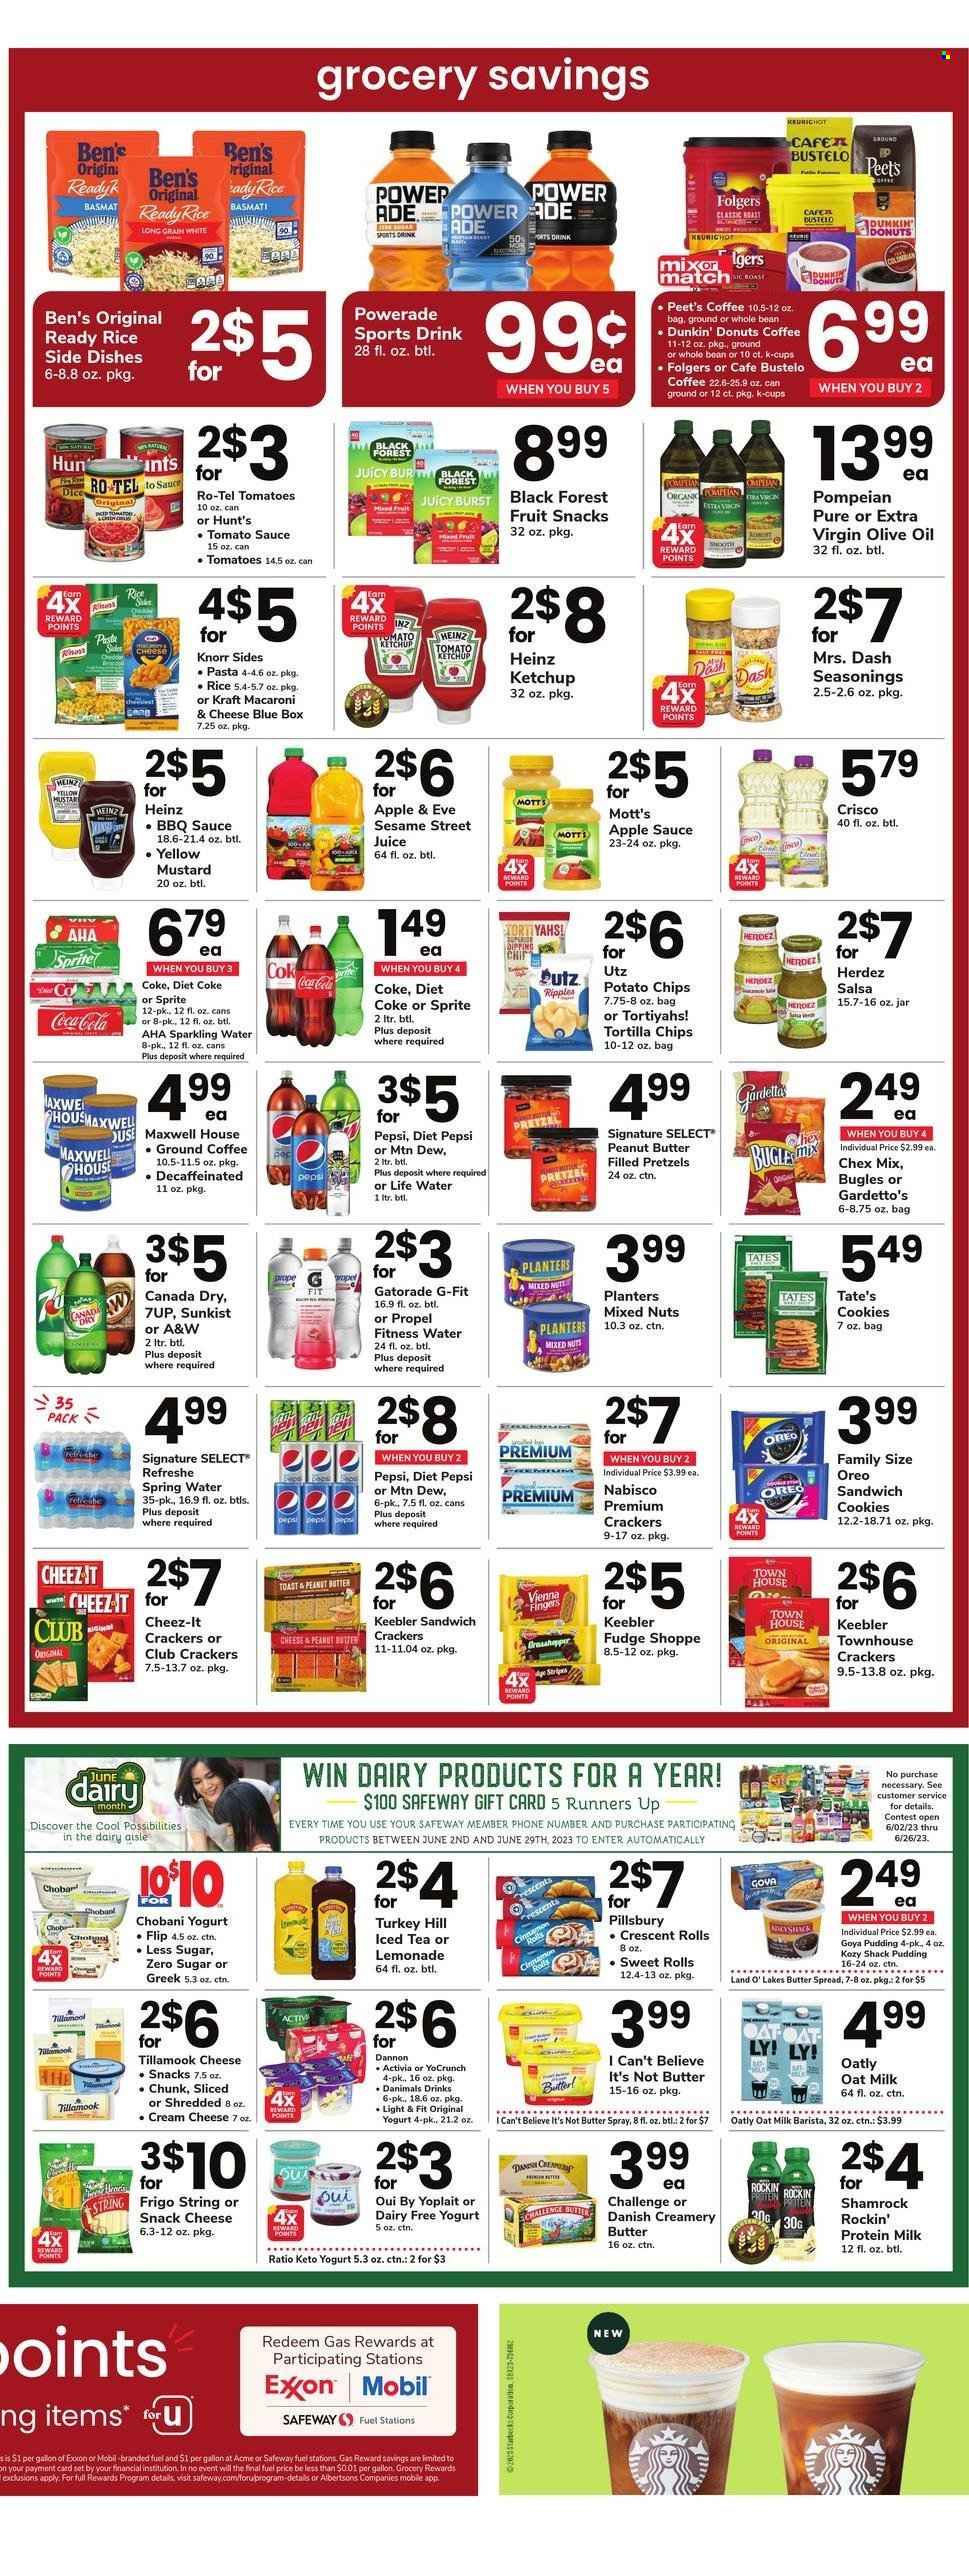 thumbnail - Safeway Flyer - 06/02/2023 - 06/08/2023 - Sales products - pretzels, crescent rolls, Dunkin' Donuts, sweet rolls, tomatoes, Mott's, turkey, macaroni & cheese, pasta, Knorr, sauce, Pillsbury, Kraft®, ready meal, cream cheese, pudding, Oreo, yoghurt, Activia, Yoplait, Chobani, Dannon, Danimals, oat milk, I Can't Believe It's Not Butter, sandwich cookies, cookies, fudge, vienna fingers, crackers, fruit snack, Keebler, Sesame Street, Nabisco, tortilla chips, potato chips, chips, Cheez-It, Chex Mix, salty snack, Crisco, tomato sauce, Heinz, Goya, basmati rice, rice, BBQ sauce, mustard, ketchup, salsa, extra virgin olive oil, olive oil, oil, apple sauce, peanut butter, mixed nuts, Planters, Canada Dry, Coca-Cola, lemonade, Mountain Dew, Sprite, Powerade, Pepsi, juice, energy drink, ice tea, Diet Pepsi, Diet Coke, soft drink, 7UP, A&W, Gatorade, Coke, spring water, sparkling water, water, Maxwell House, coffee, Folgers, ground coffee, coffee capsules, K-Cups, electrolyte drink. Page 2.